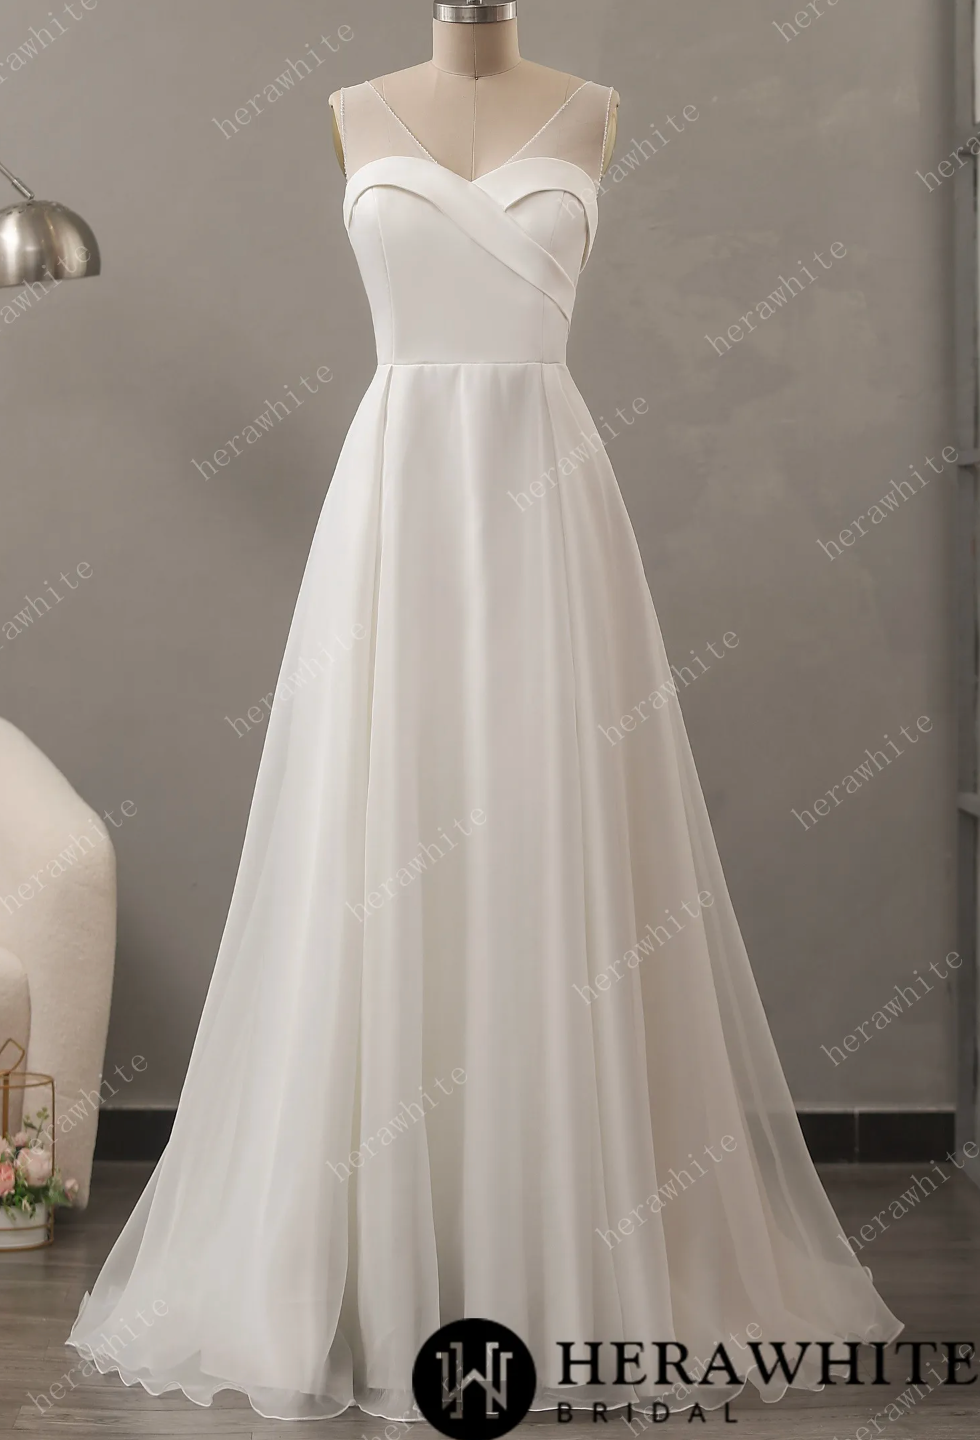 Elegant A-Line Dress with Organza Skirt and V-Neck